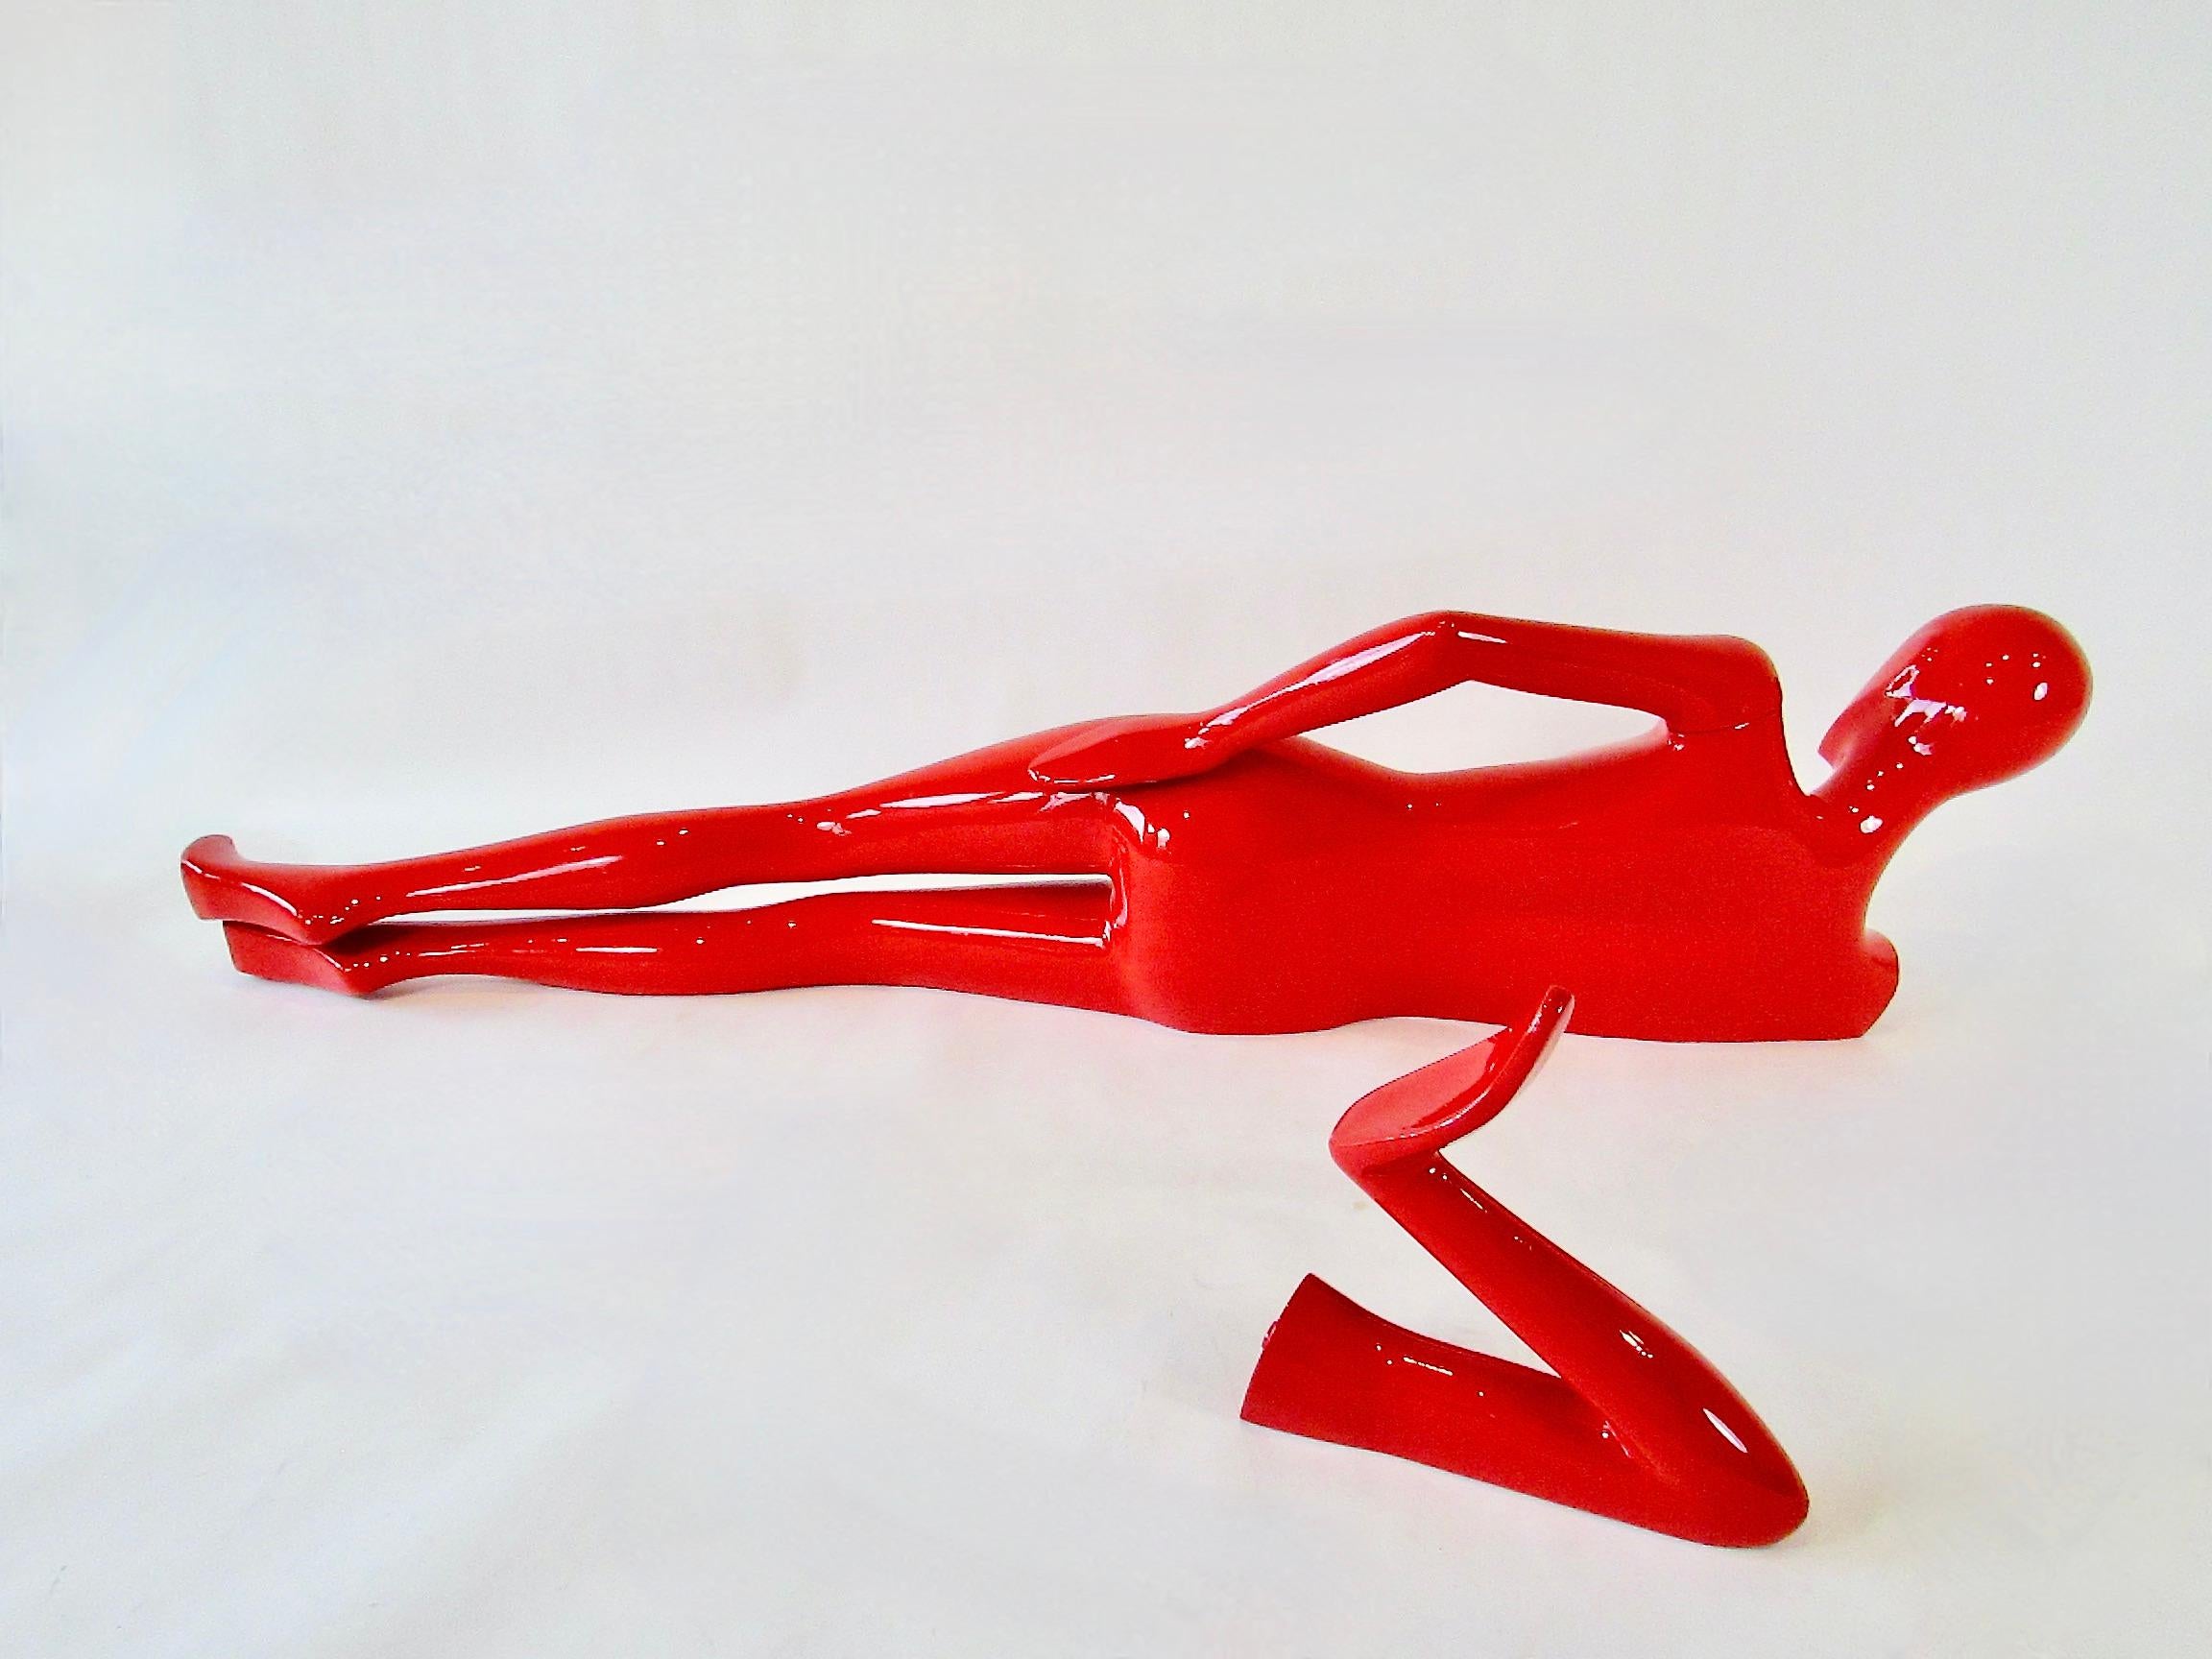 Plastic Sexy lady in red mannequin sculpture in head on hand repose